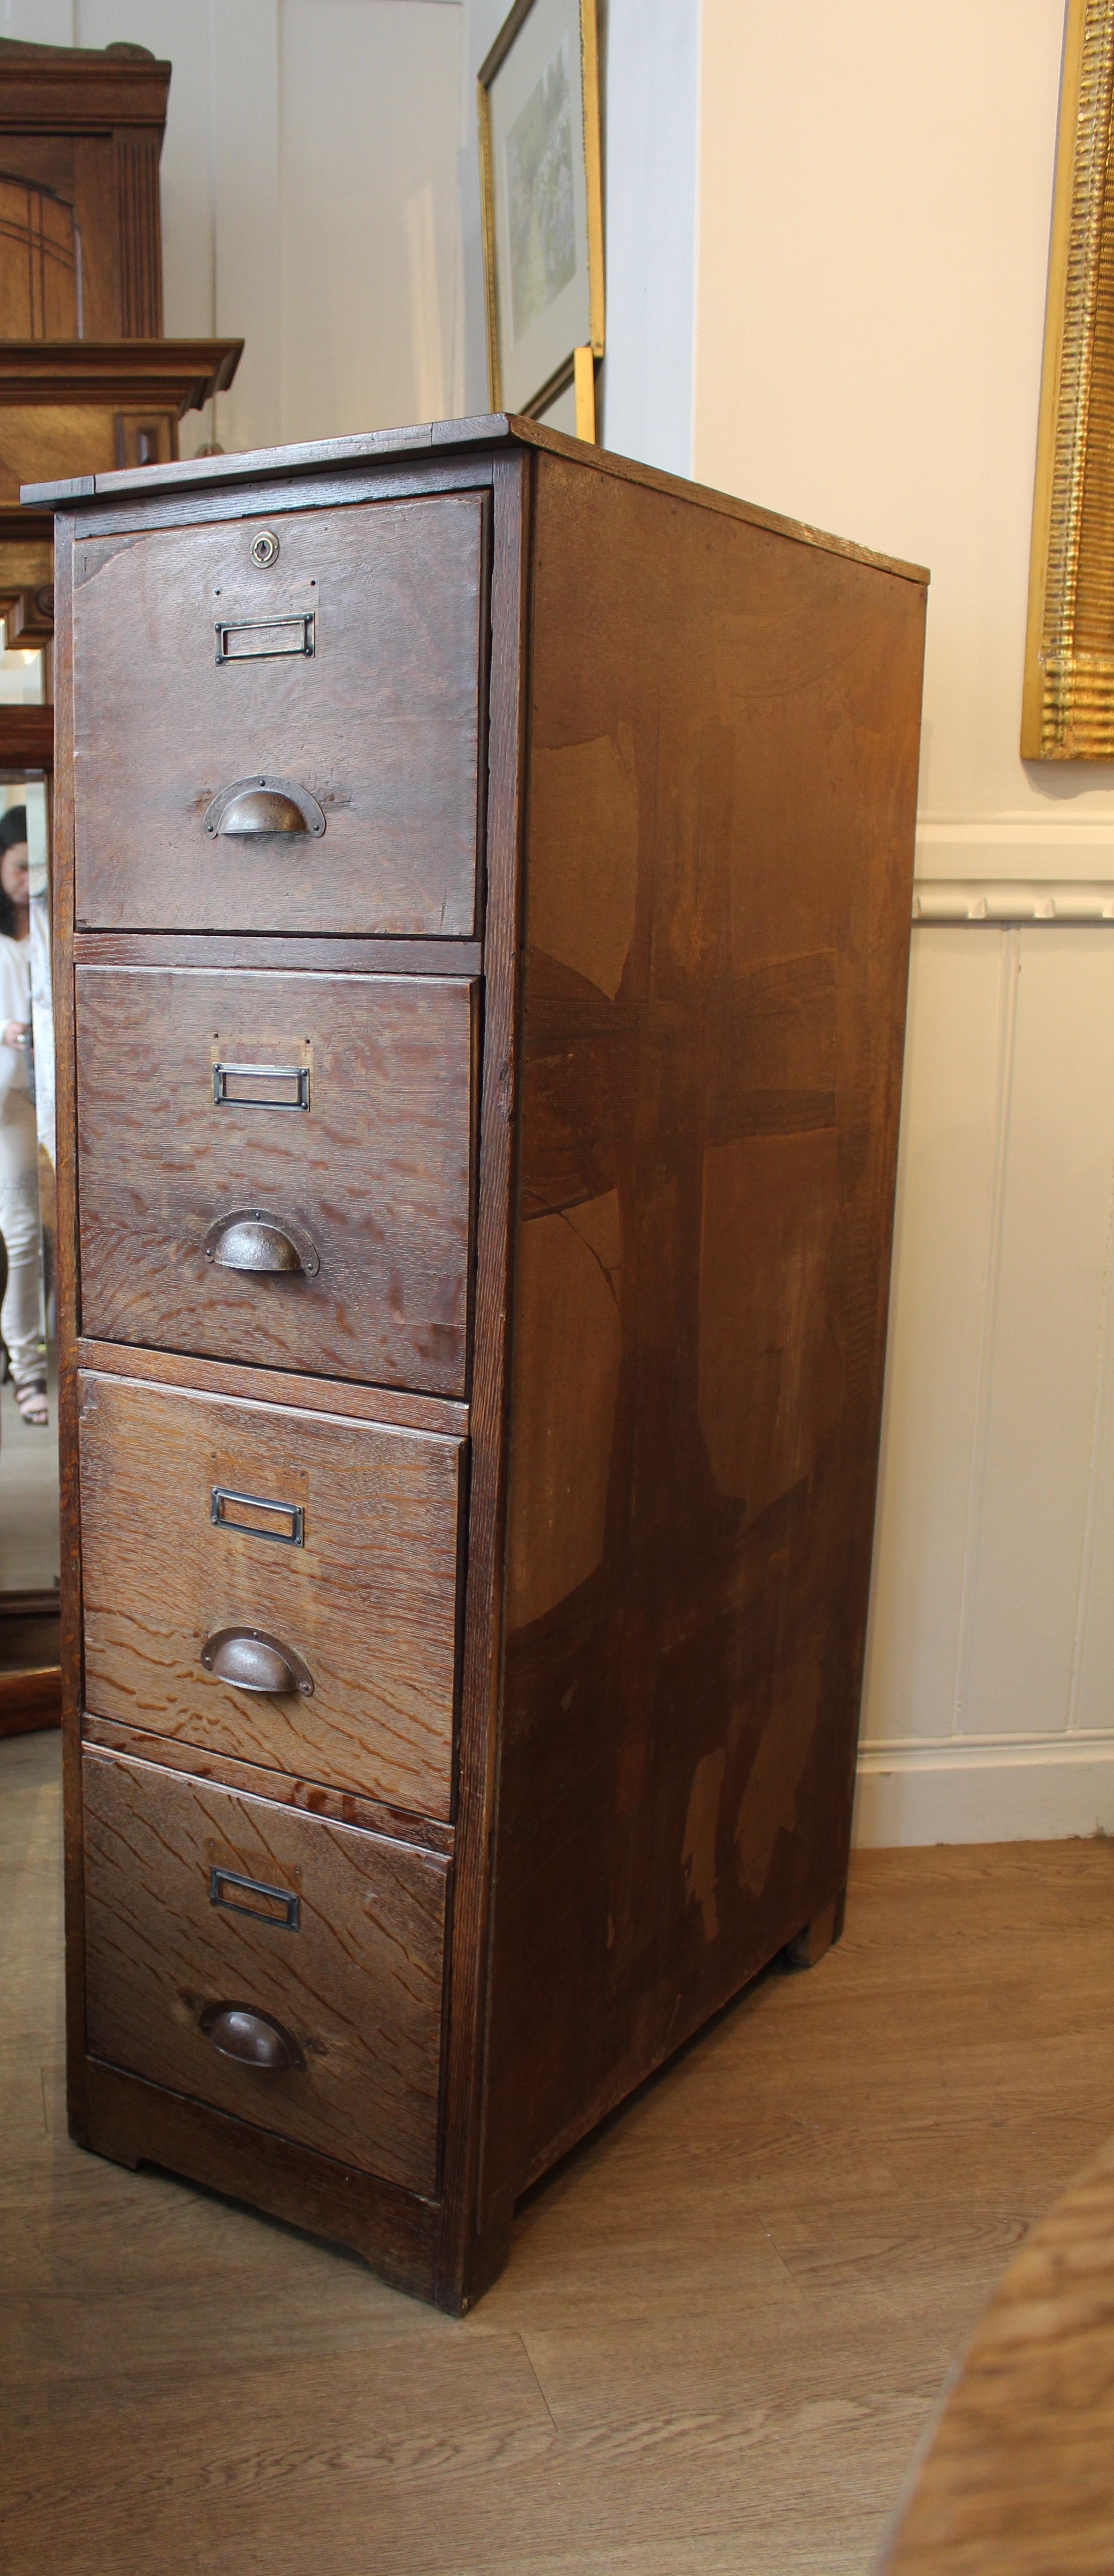 Art Deco Utilitarian 1940 French Quarter Sawn Oak 4 Chest Drawers Filing Cabinet In Good Condition For Sale In Dorking, Surrey